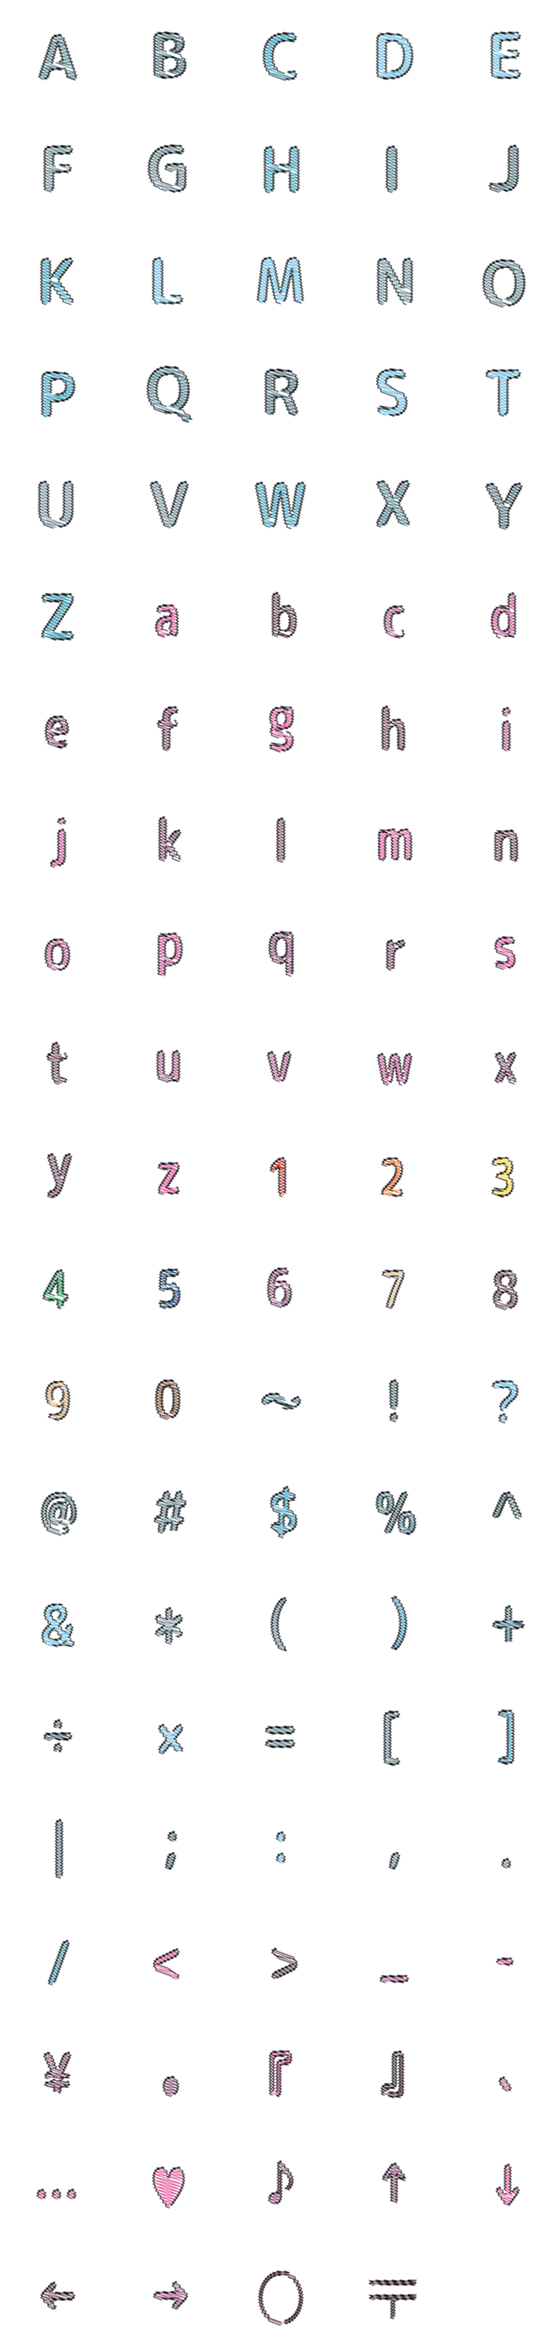 [LINE絵文字]Hand drawn colorful lettersの画像一覧